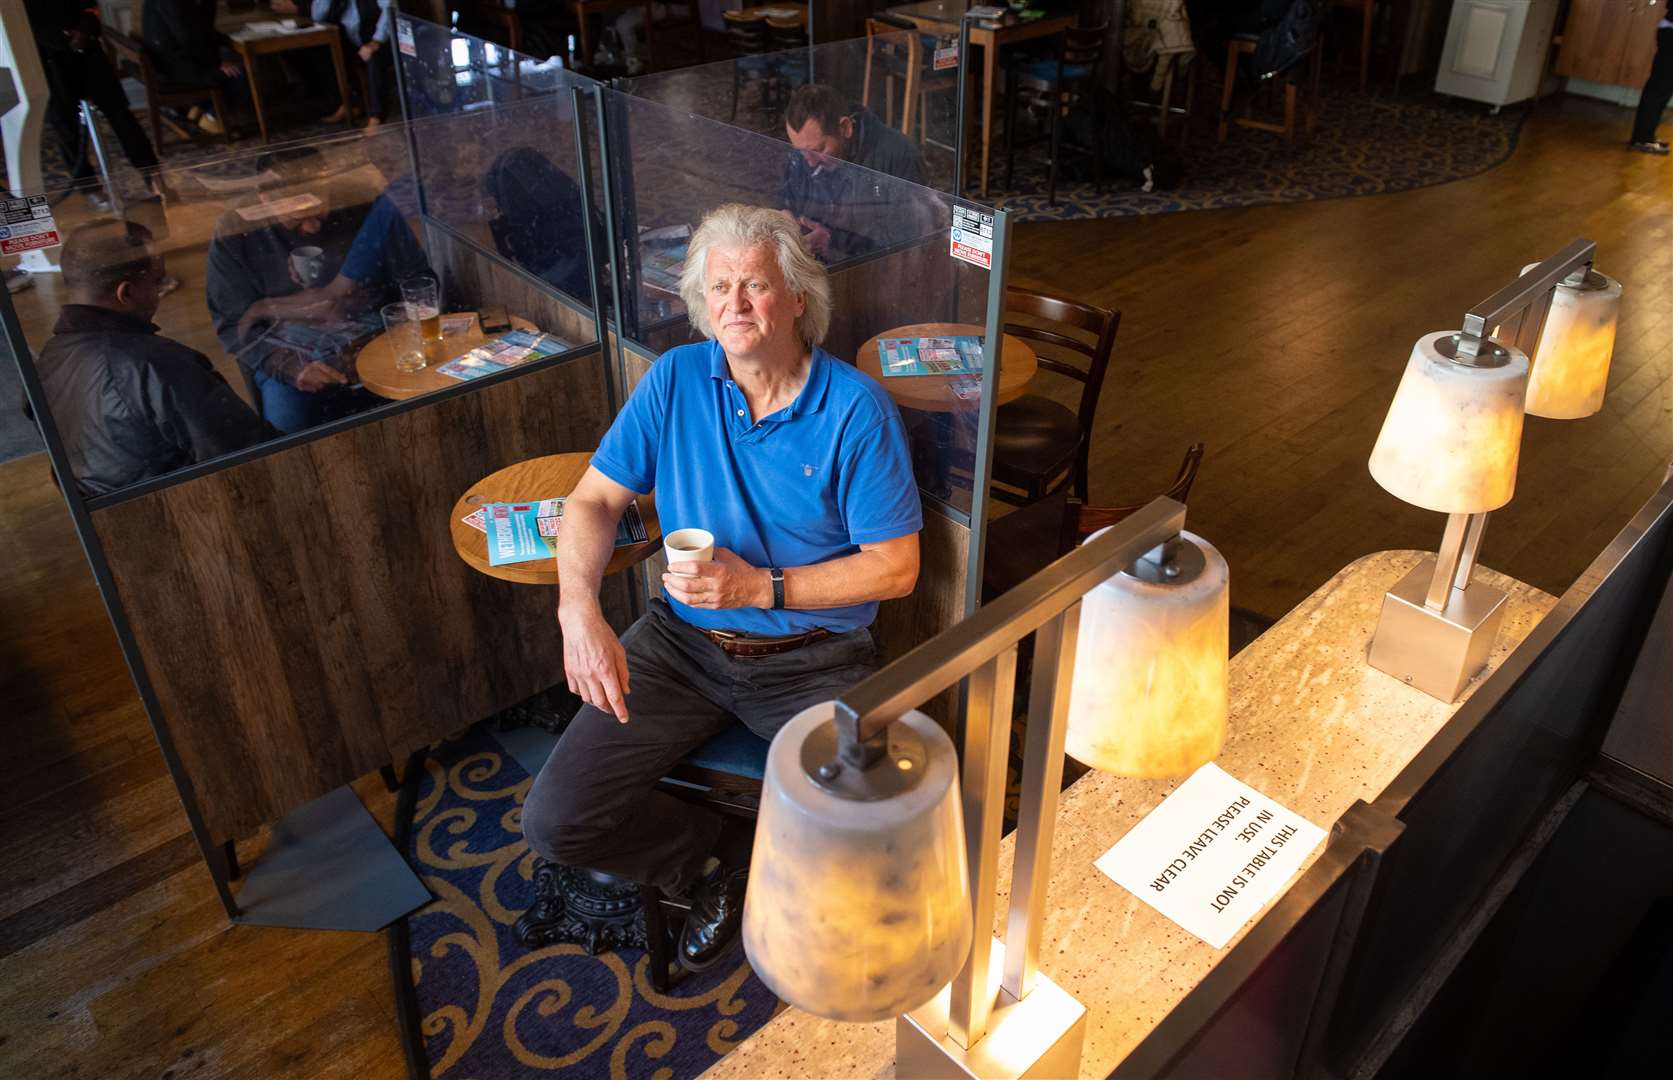 JD Wetherspoon chairman Tim Martin said the firm is increasing investment in its pubs (Dominic Lipinski/PA)